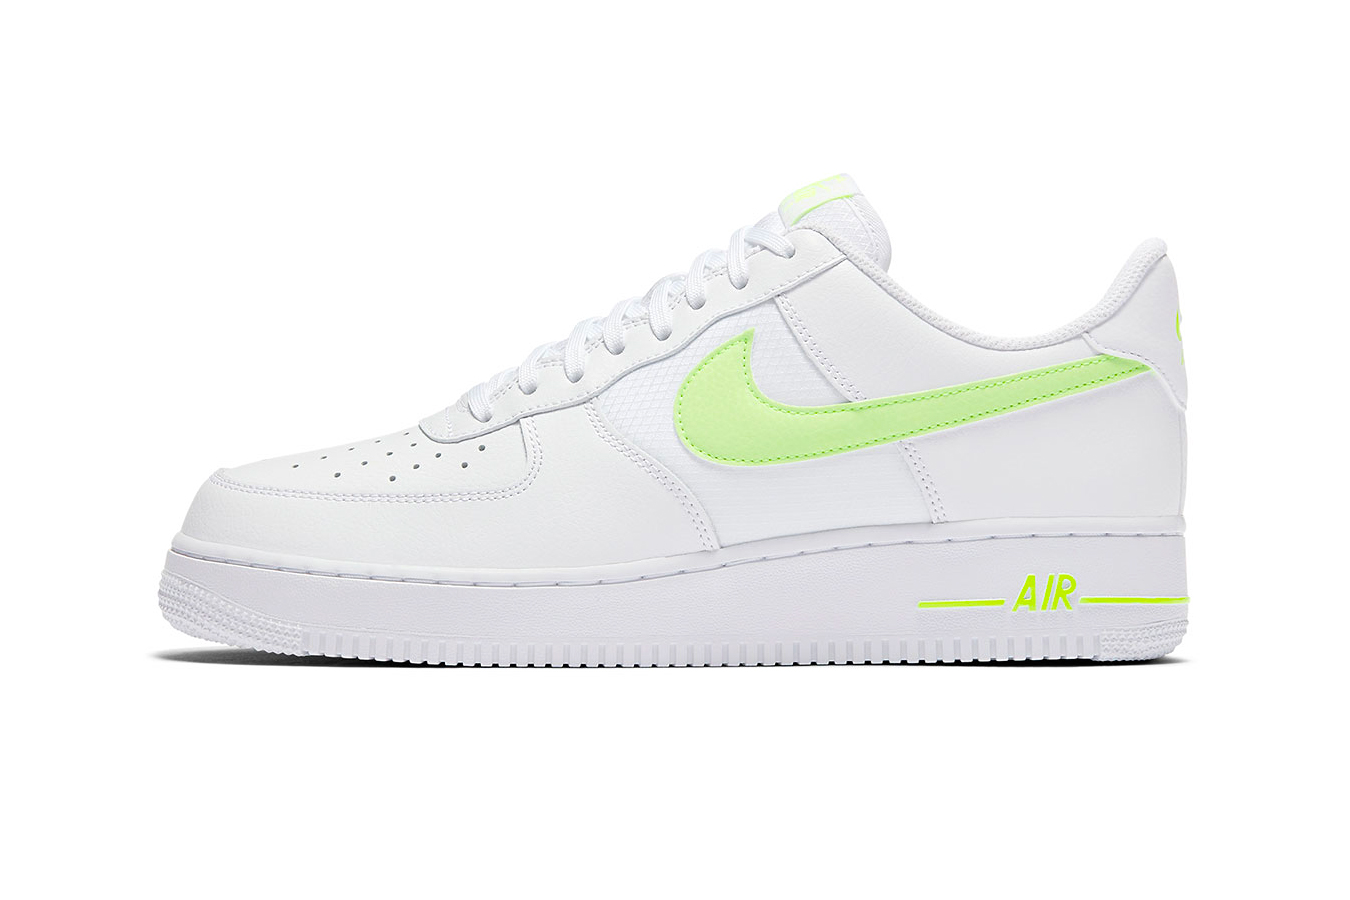 Nike Mixes Leather and Mesh on New Air Force 1s | HYPEBEAST غسالة مواعين صغيره